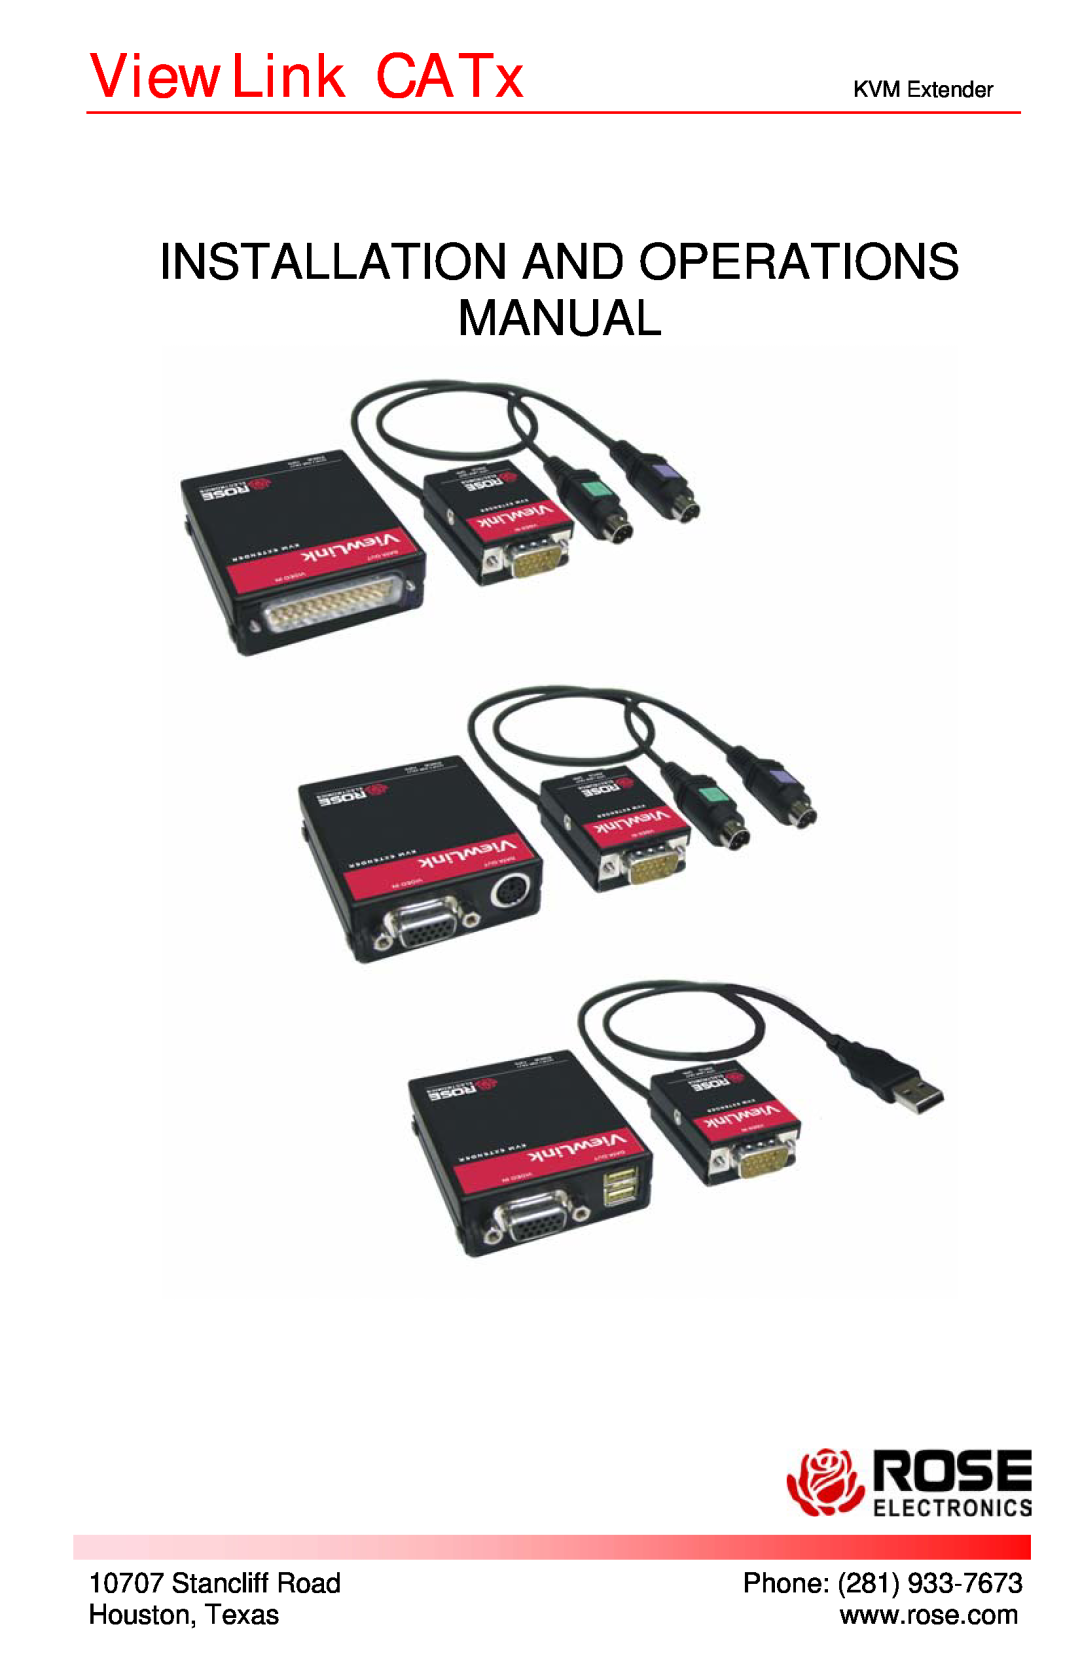 Rose electronic manual ViewLink CATx, Installation And Operations Manual, KVM Extender 